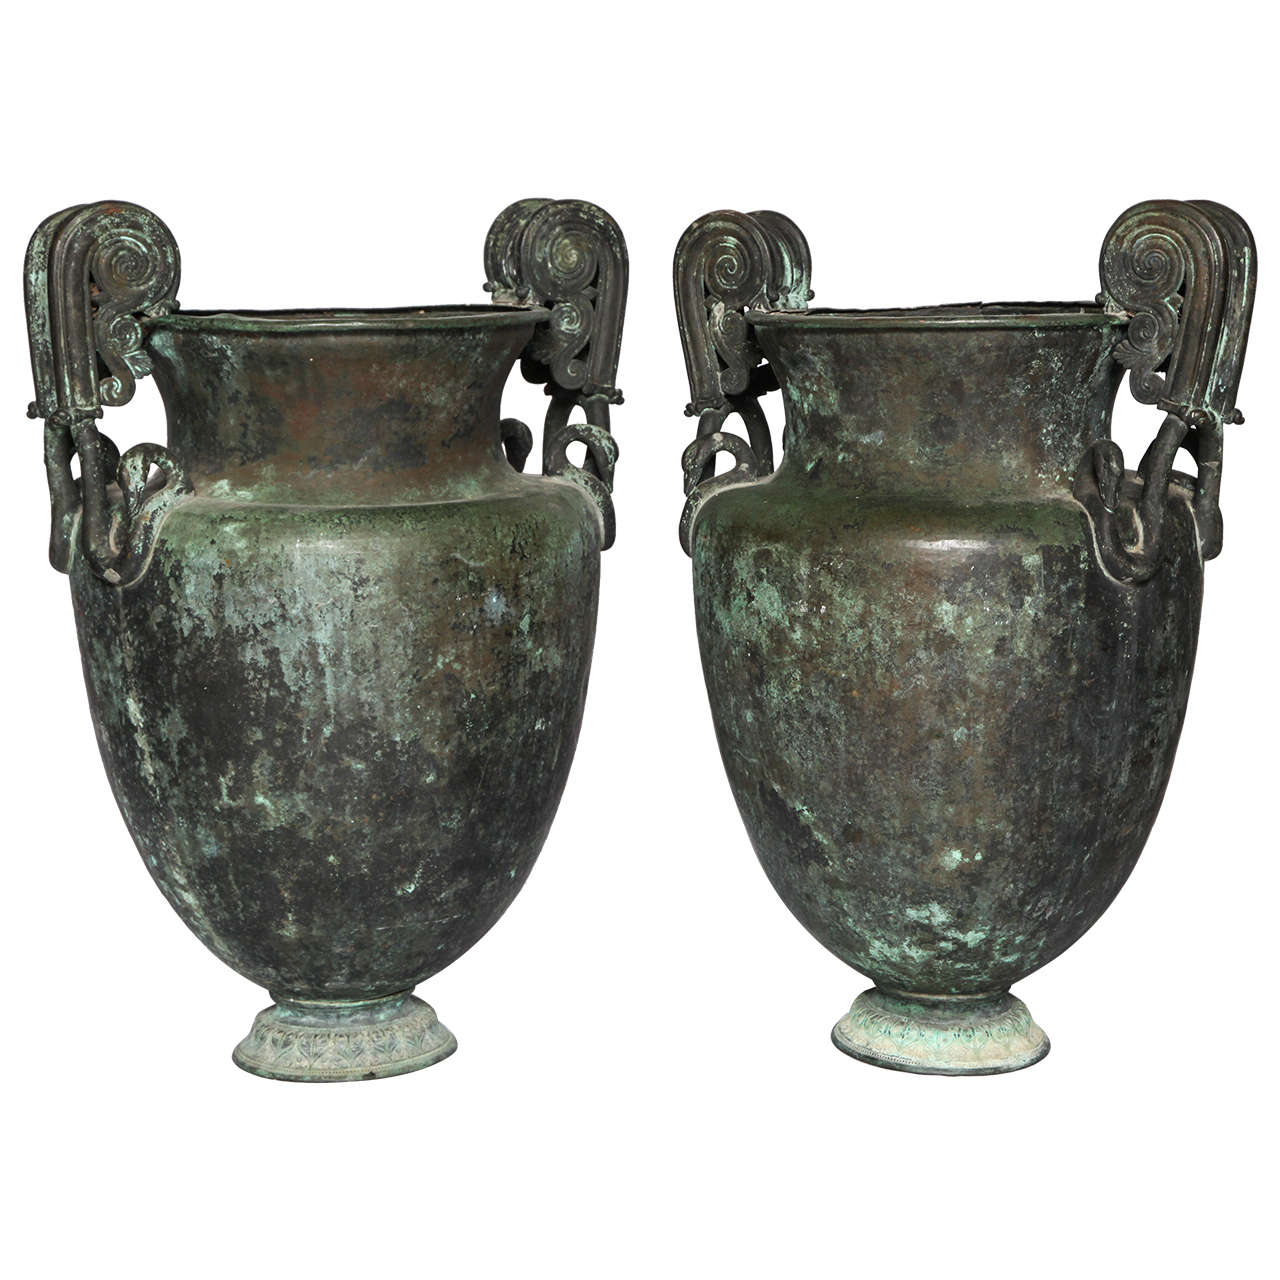 Pair of Large Neoclassical Urns For Sale